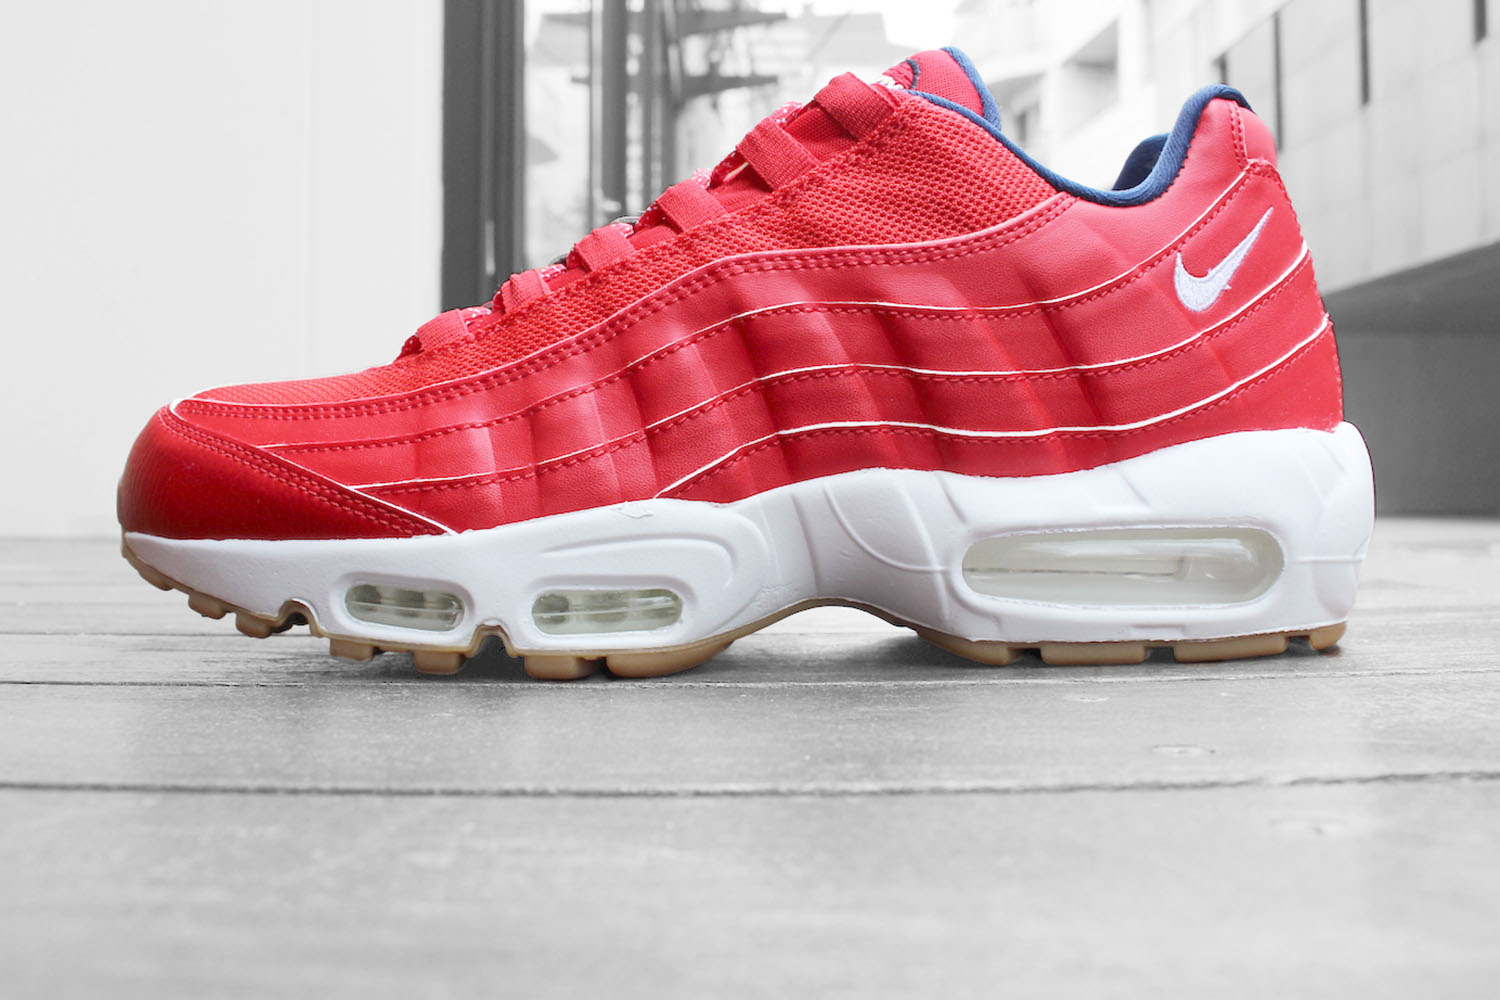 NIKE AIR MAX 95 PRM "INDEPENDENCE DAY" | BREAKS GENERAL STORE